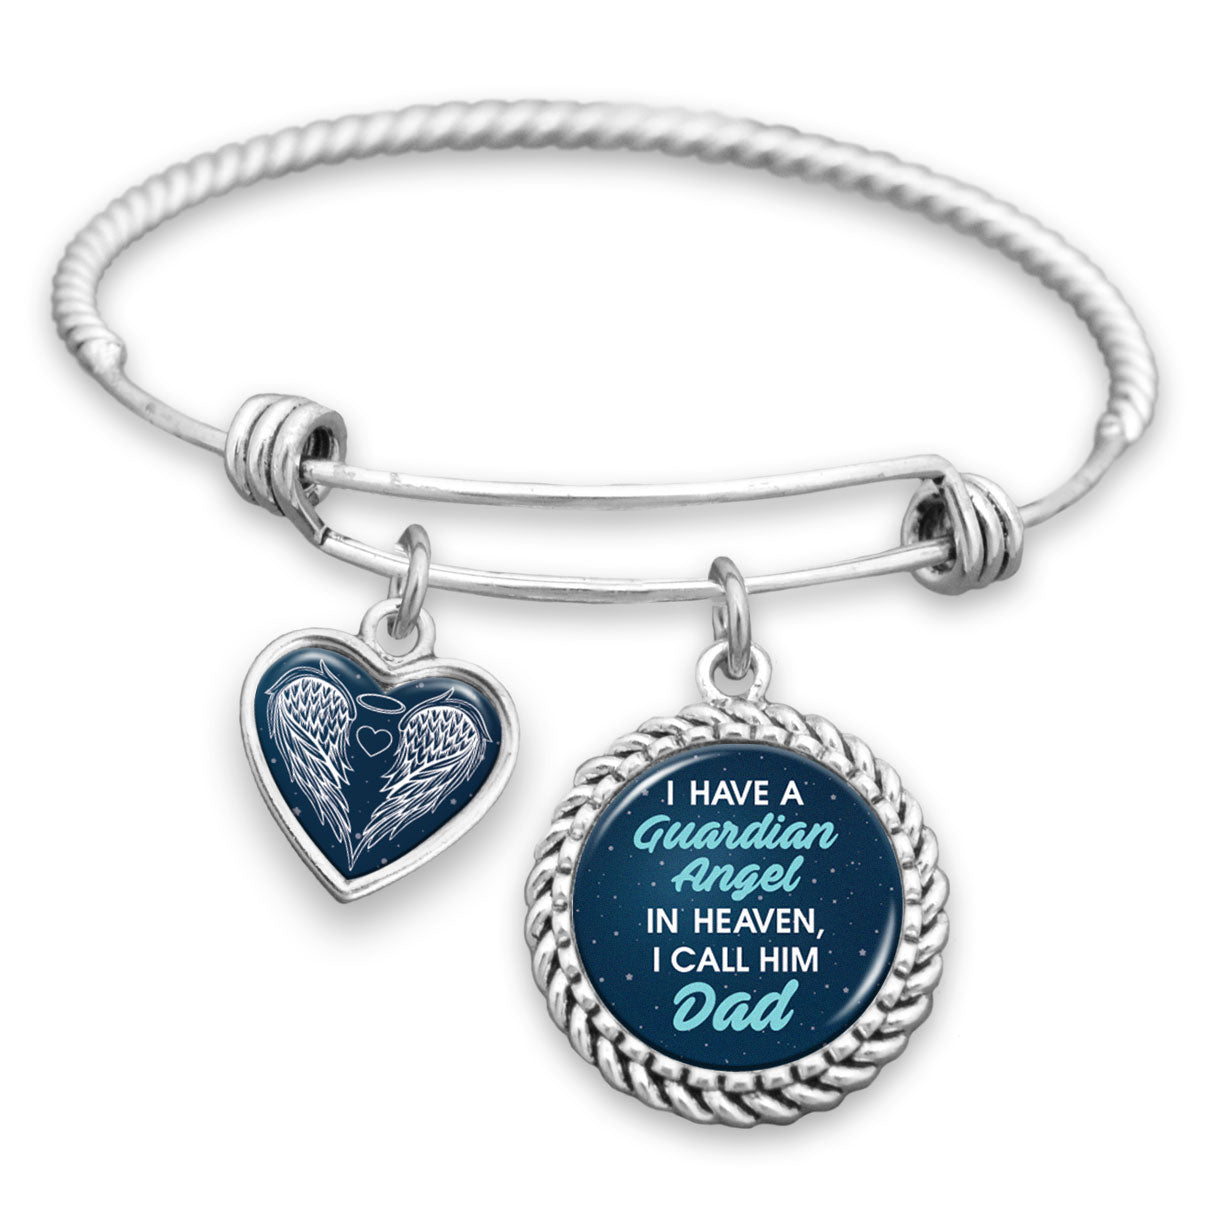 I Have A Guardian Angel In Heaven And I Call Him Dad Night Sky Charm Bracelet